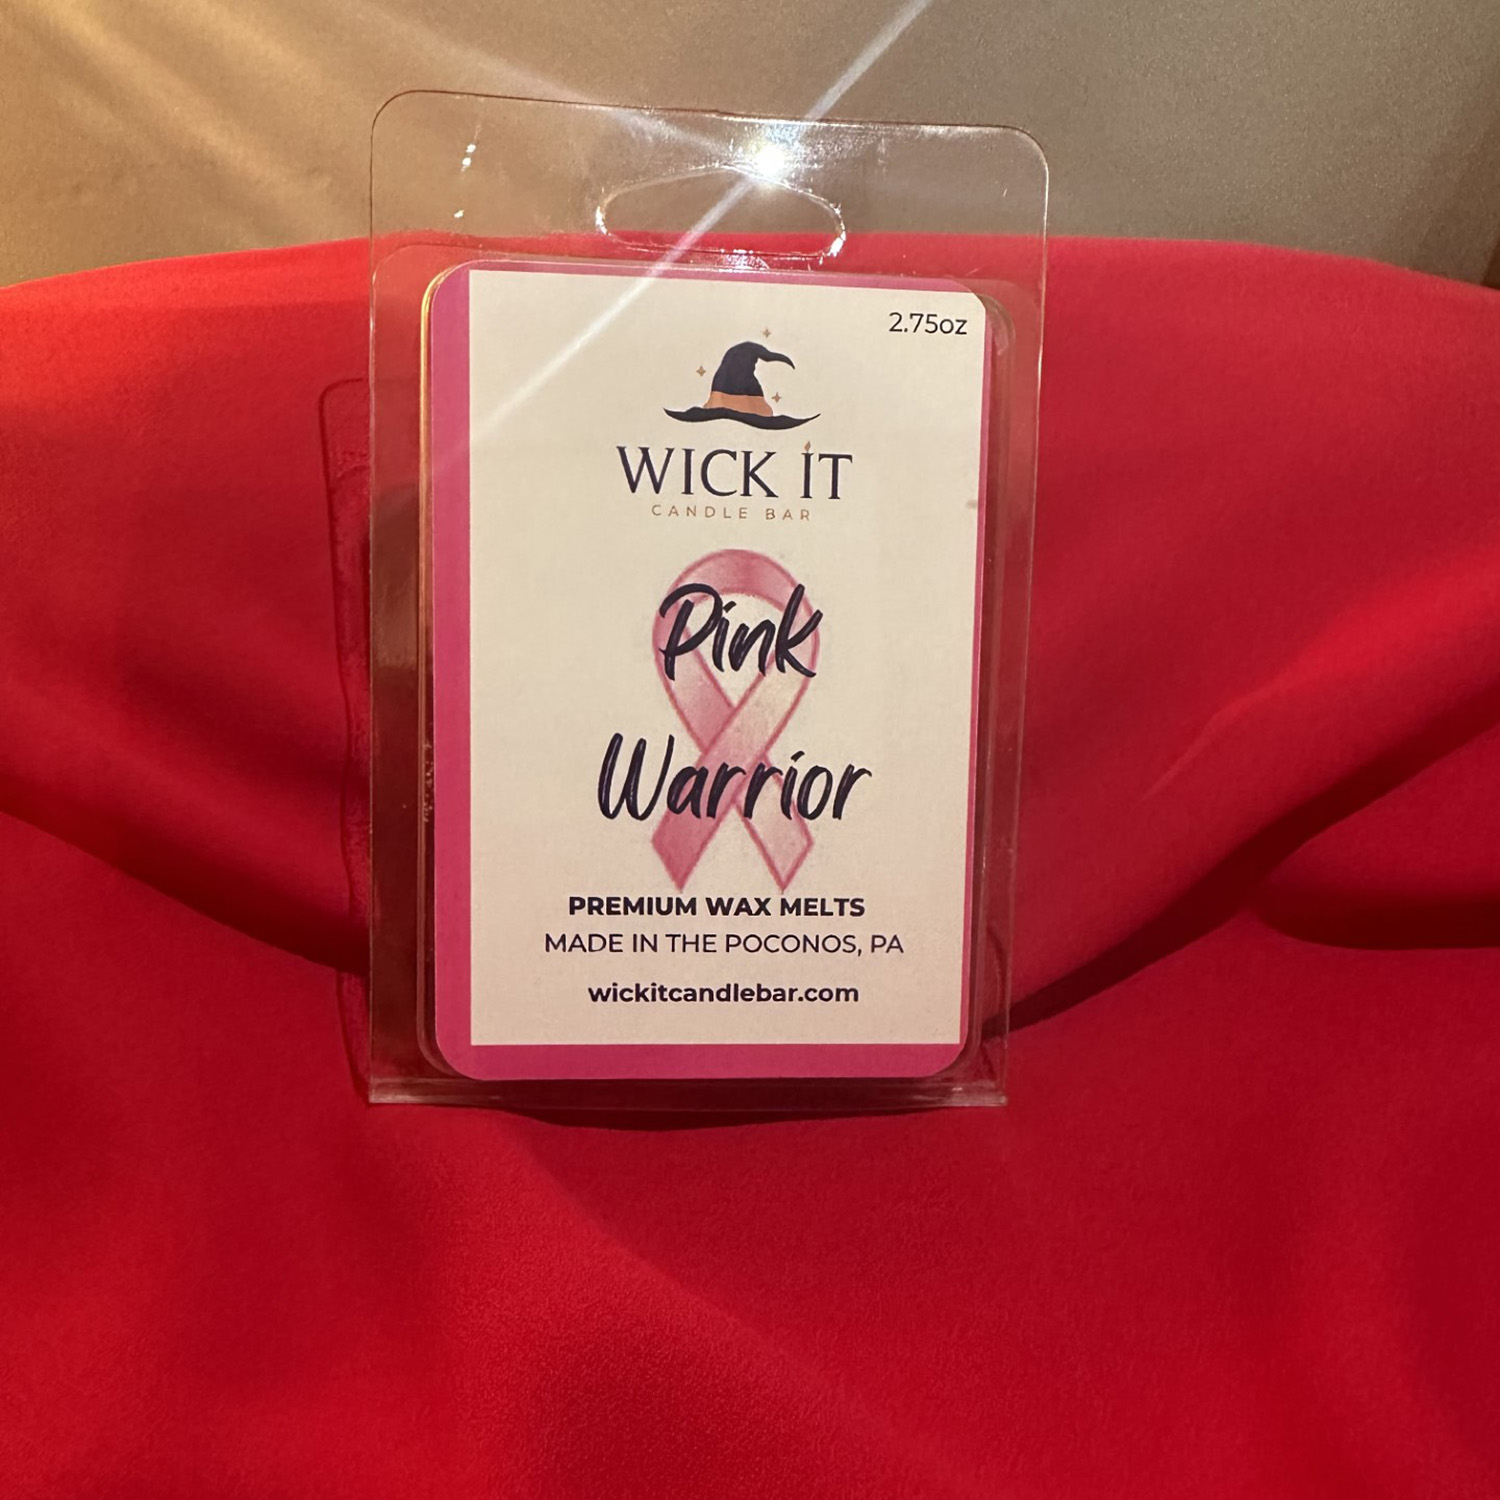 Wick It Candle Bar Pink Warrior Wax Melt | 6 Pack